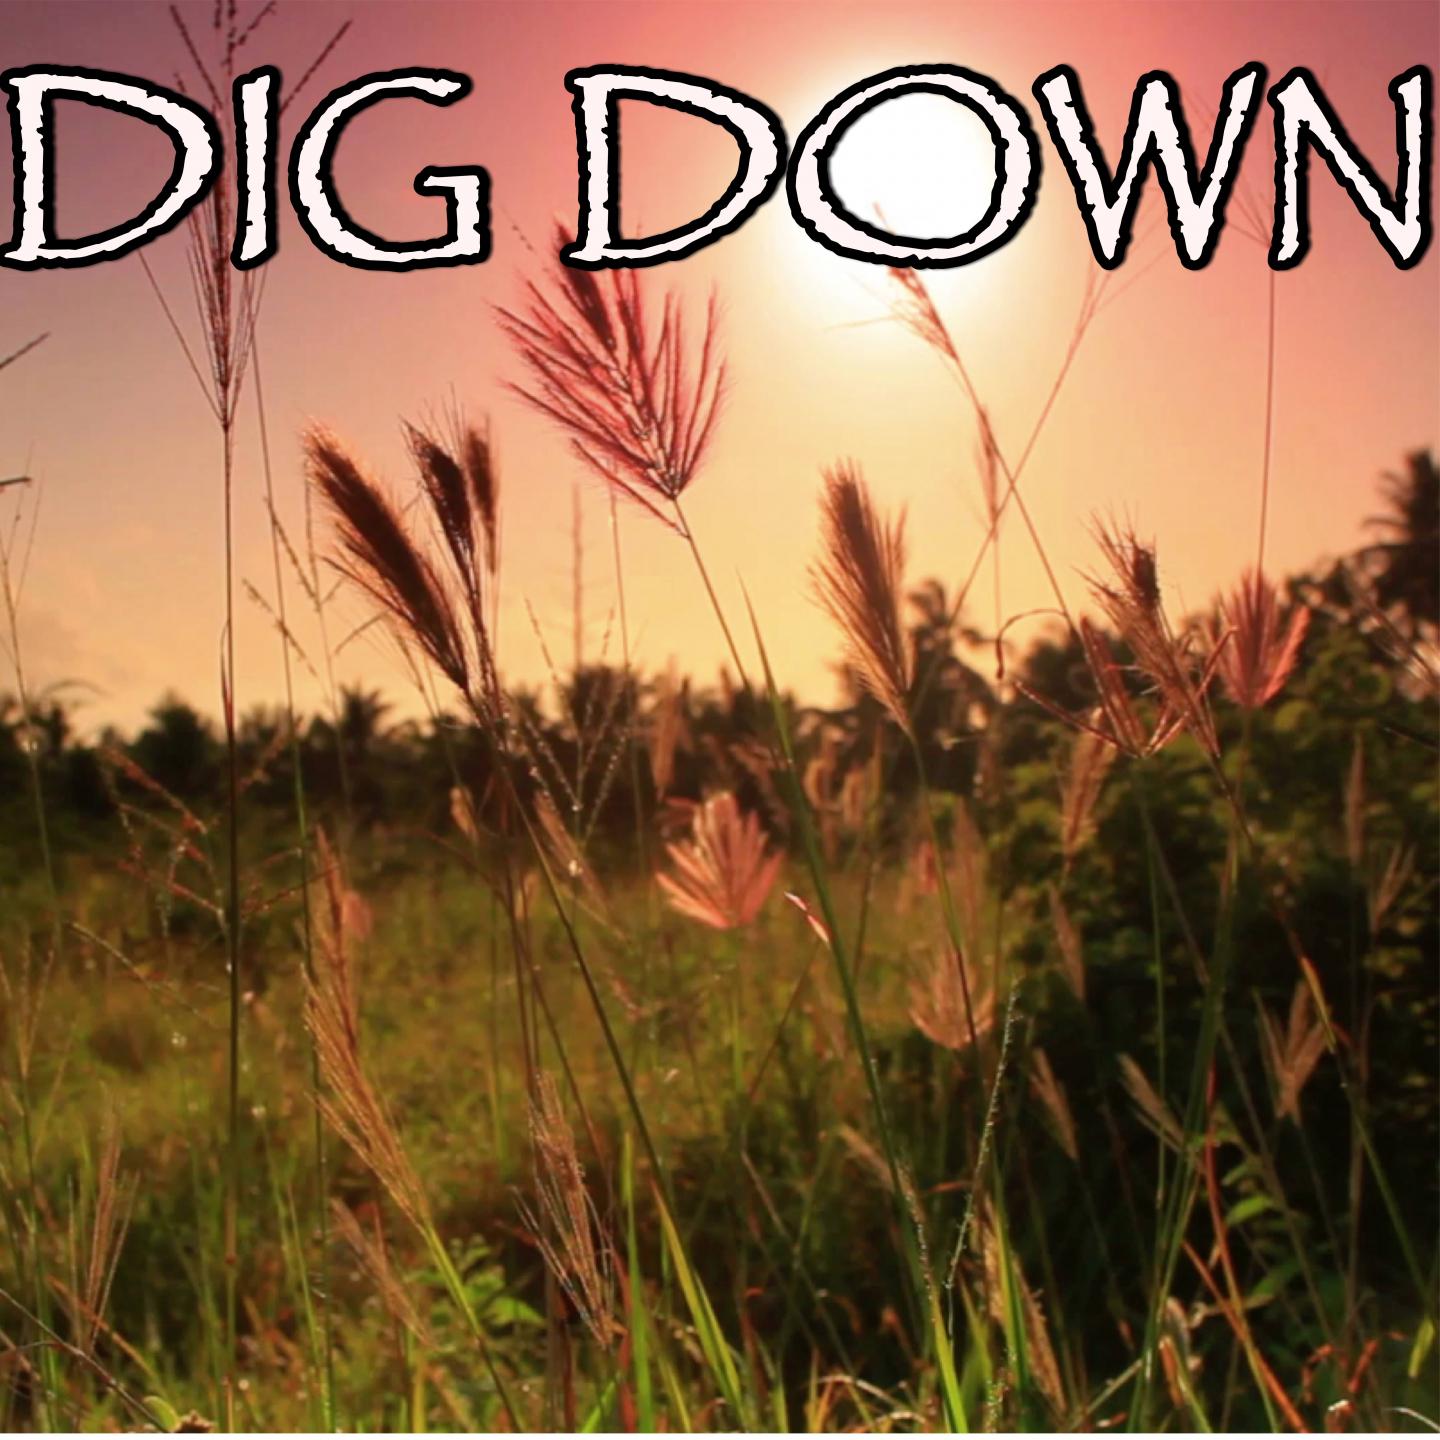 Dig Down - Tribute to Muse (Instrumental Version)